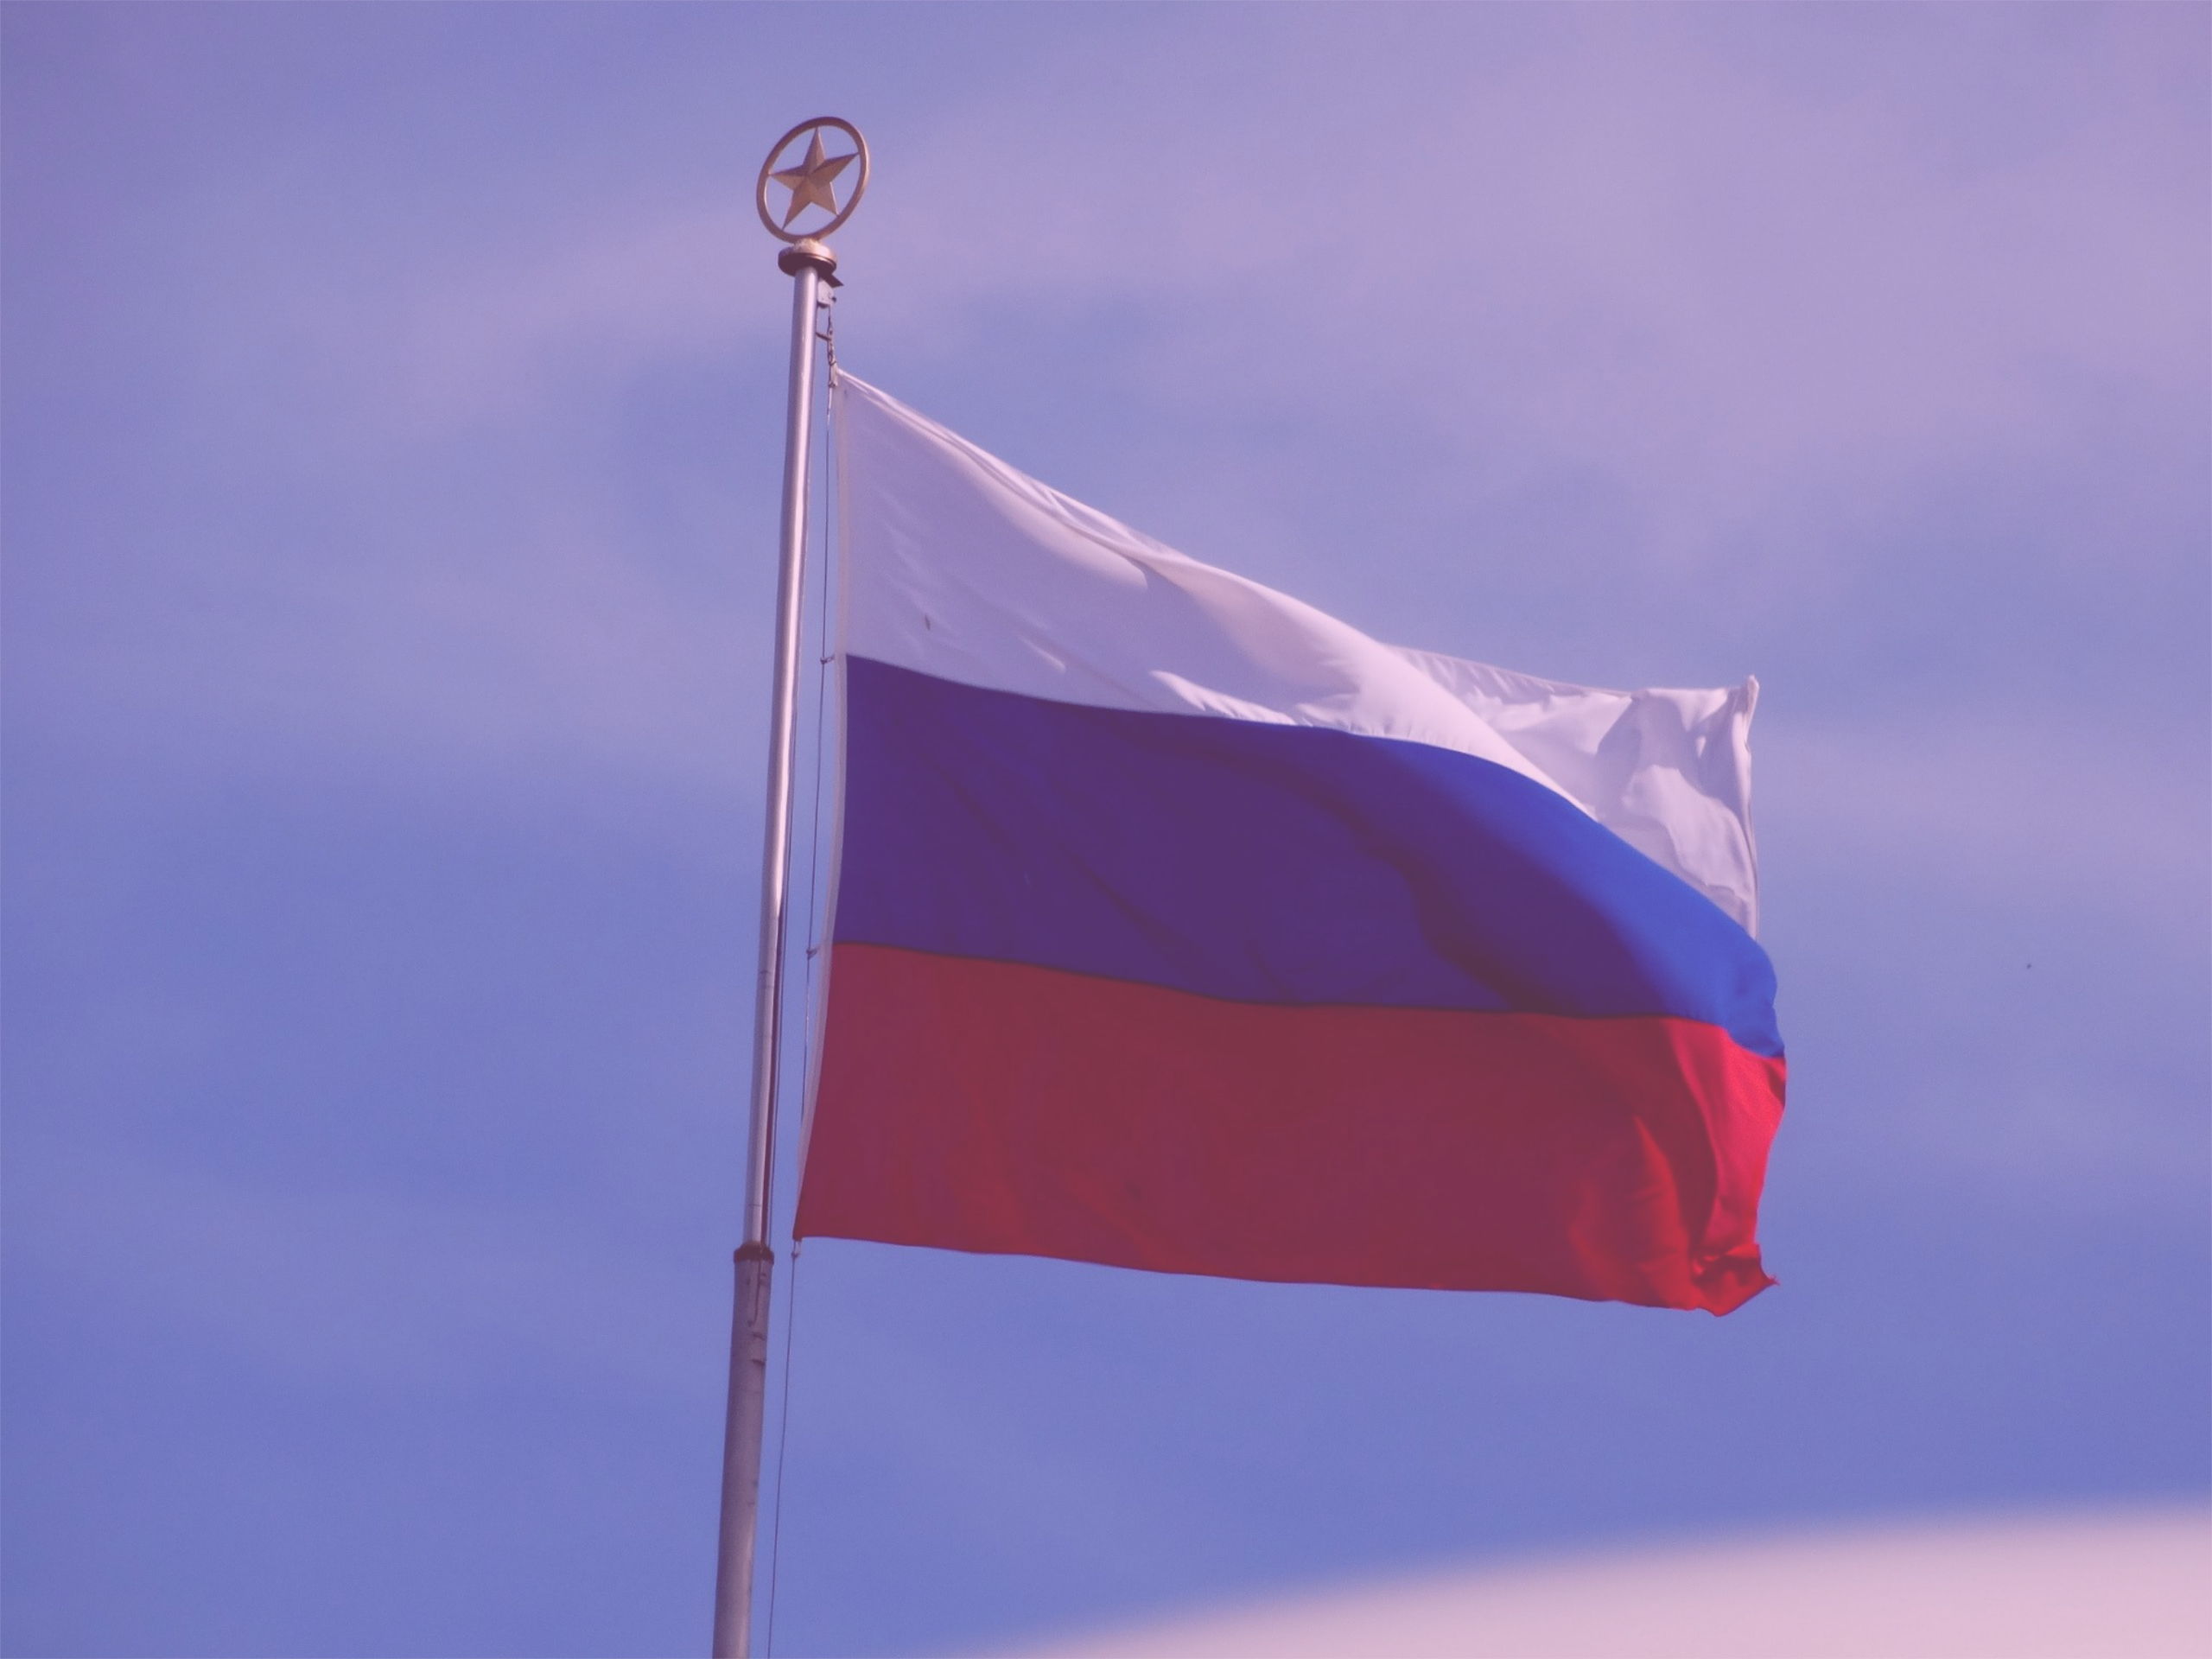 Photo: "Flag In The Wild Russian Federation (164796773)", by Santiago Quintero licensed under CC BY 3.0. Hue modified from the original